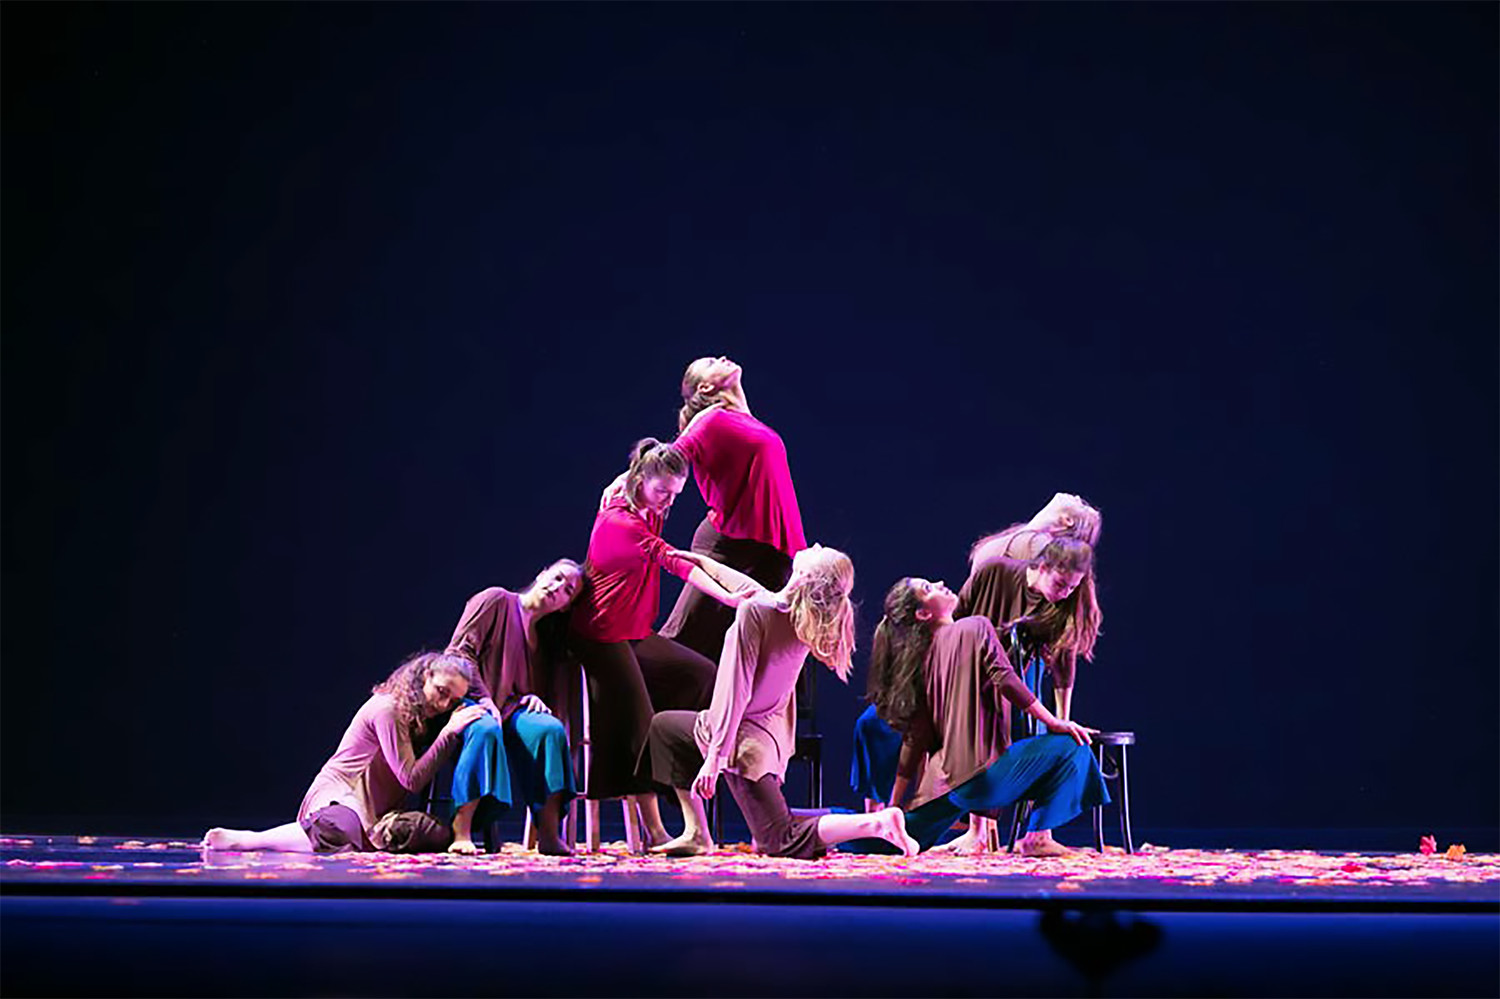 UVA Dance students in Benevolence by Artist-In-Residence Chien-Ying Wang, performed at the 2018 Fall Dance Concert, supported by a UVA Arts Council grant. IMAGE CREDIT: Jack Looney